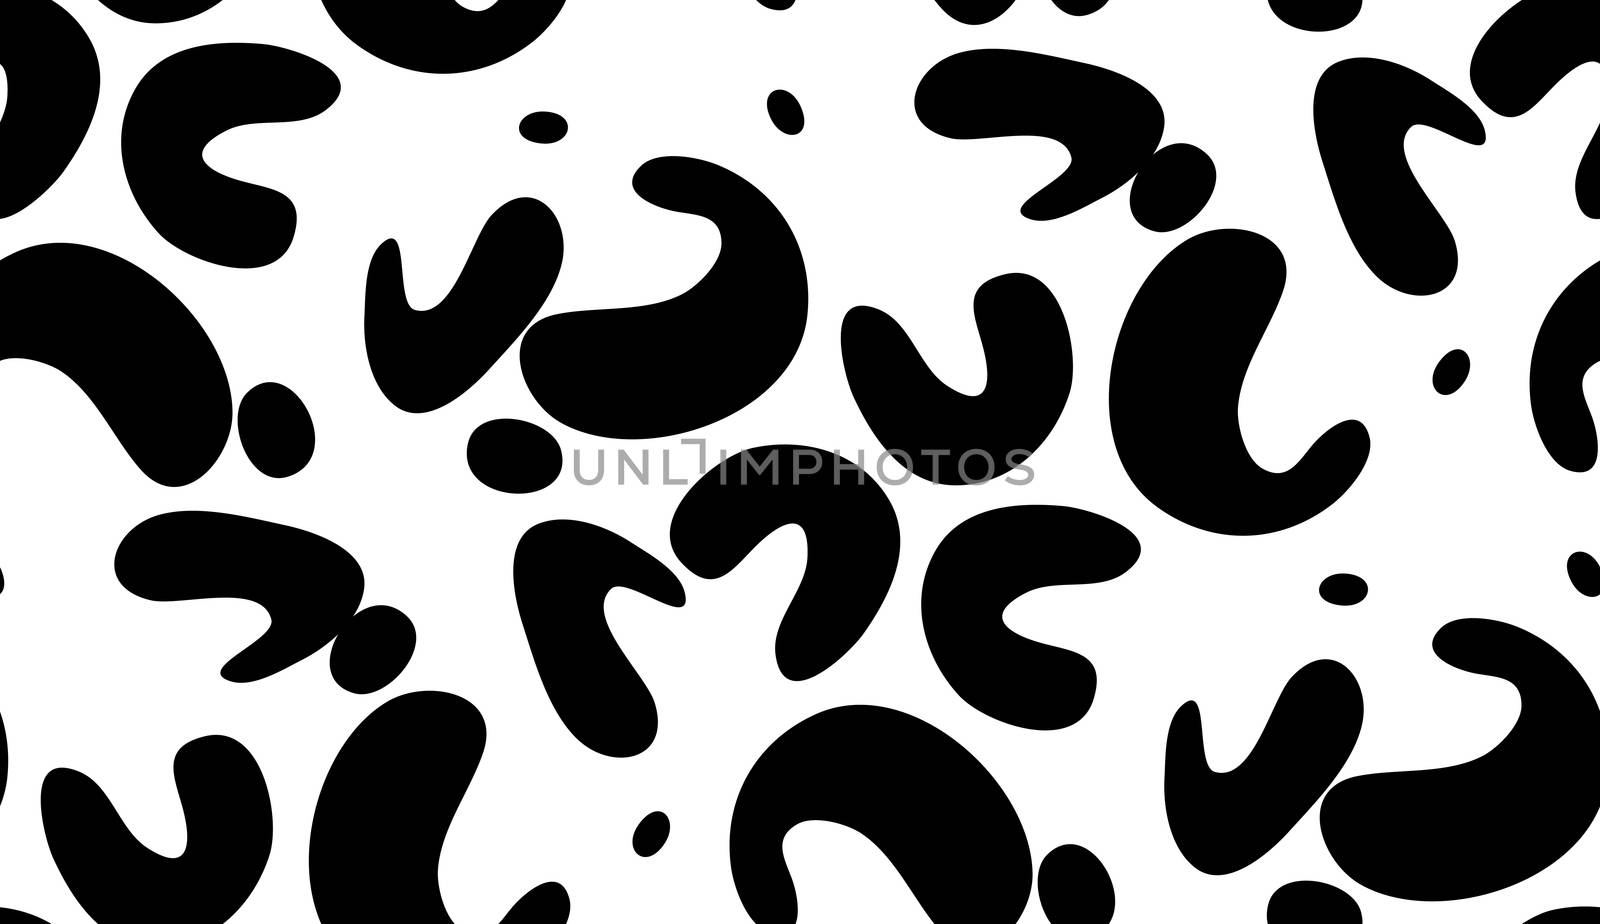 Seamless pattern of black fortune cookie shapes